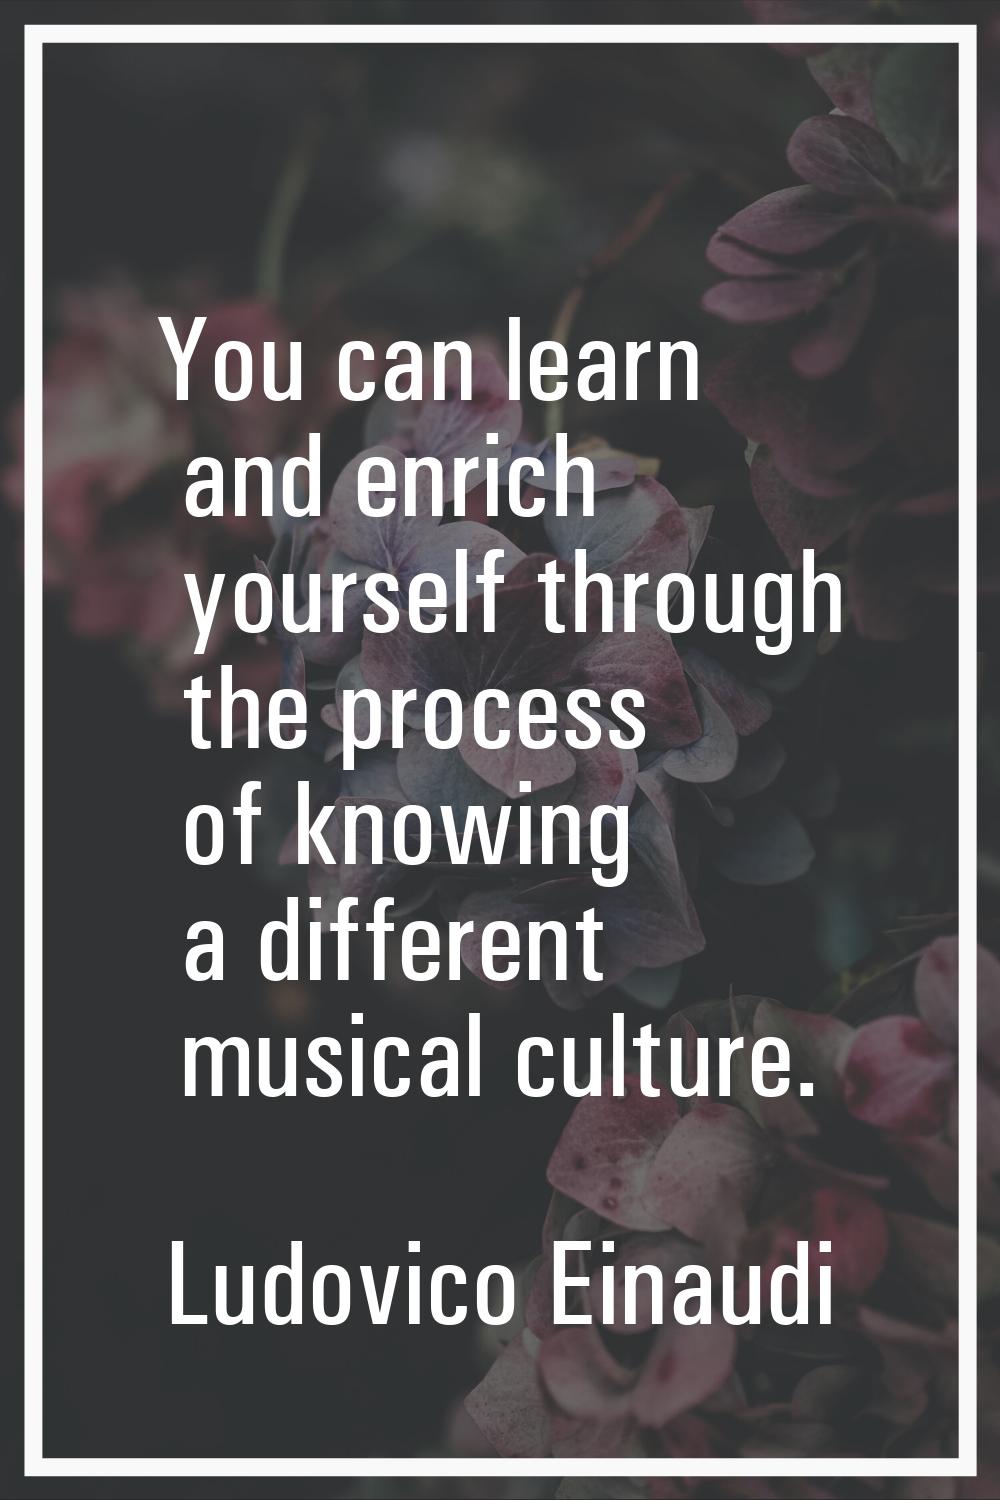 You can learn and enrich yourself through the process of knowing a different musical culture.